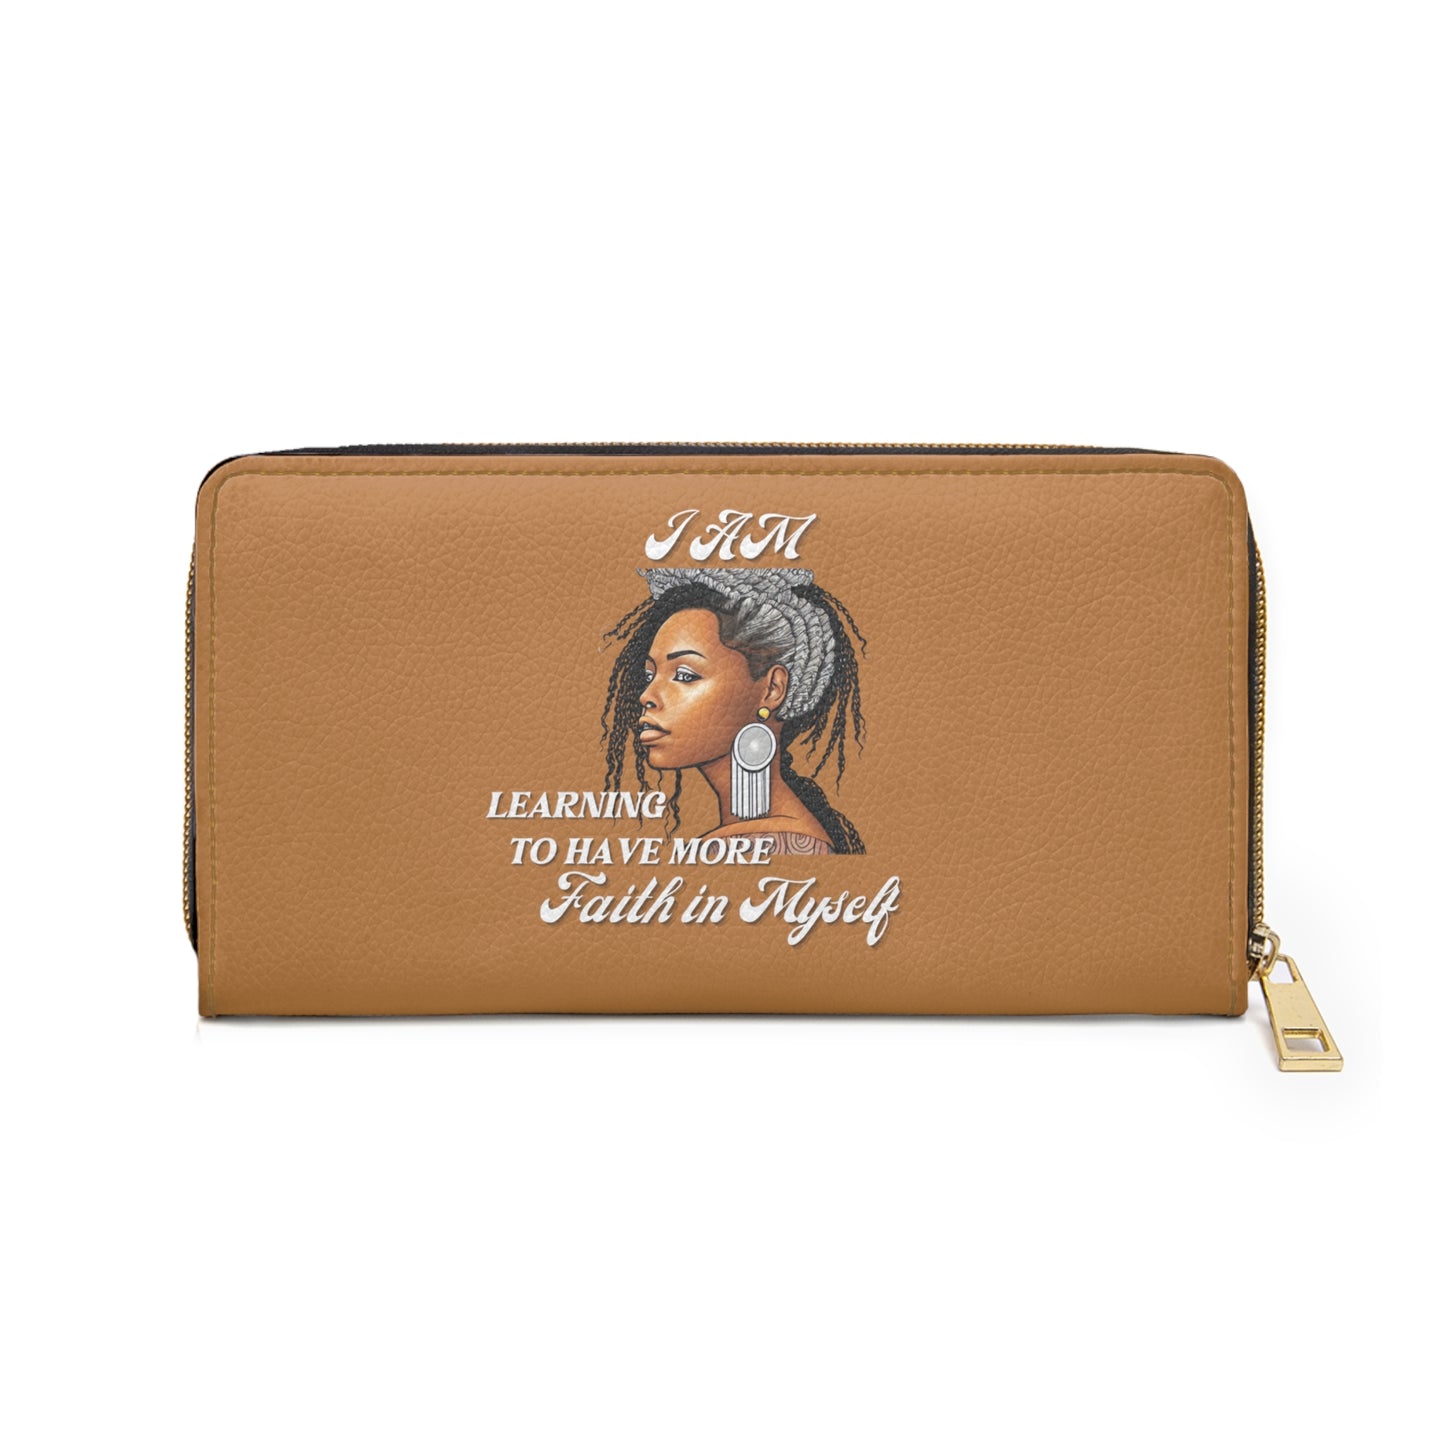 " Faith In Myself" -Positive Afrocentric Affirmation Vegan Leather Wallet Bag- Empower Your Style and Self-Love; Brown Wallet